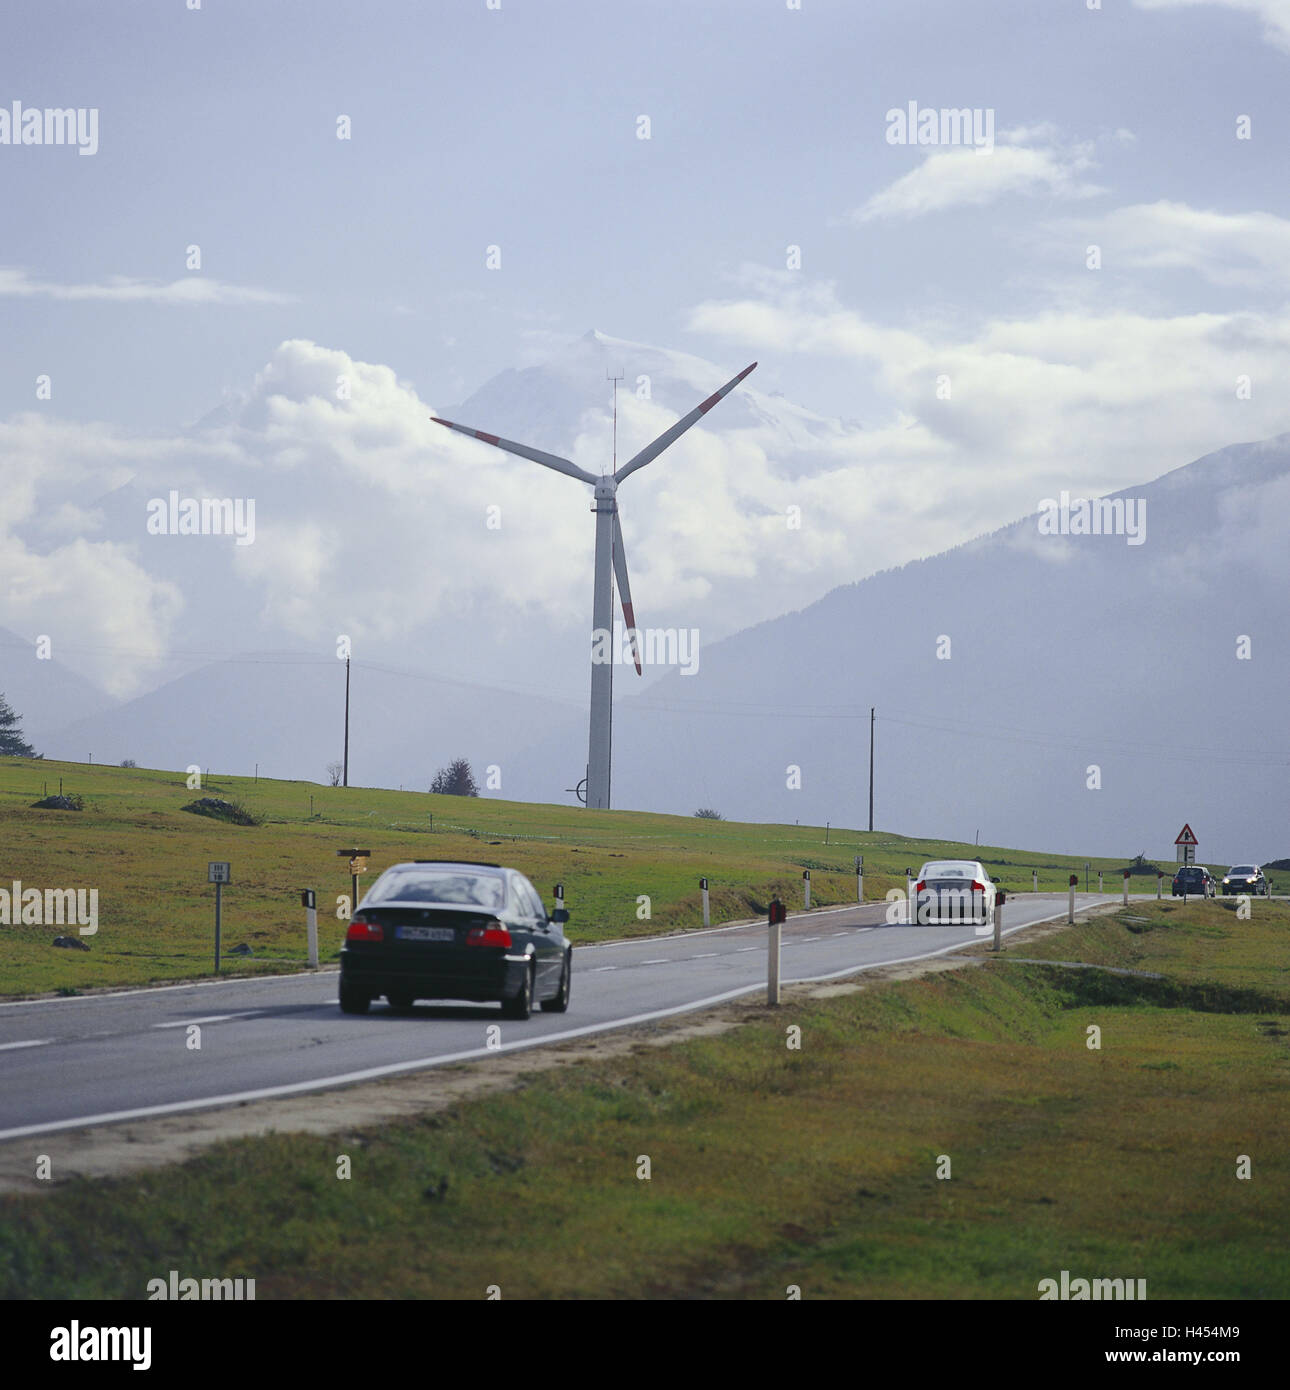 Italy, South Tyrol, crisp pass, street, traffic, wind turbine, mountain, Ortler, mountain pass, holiday traffic, cars, Pkw's, heavens, clouds, hazy, cloudily, wind power, energy, wind power, current production, alternatively, renewable, climate protection, Stock Photo